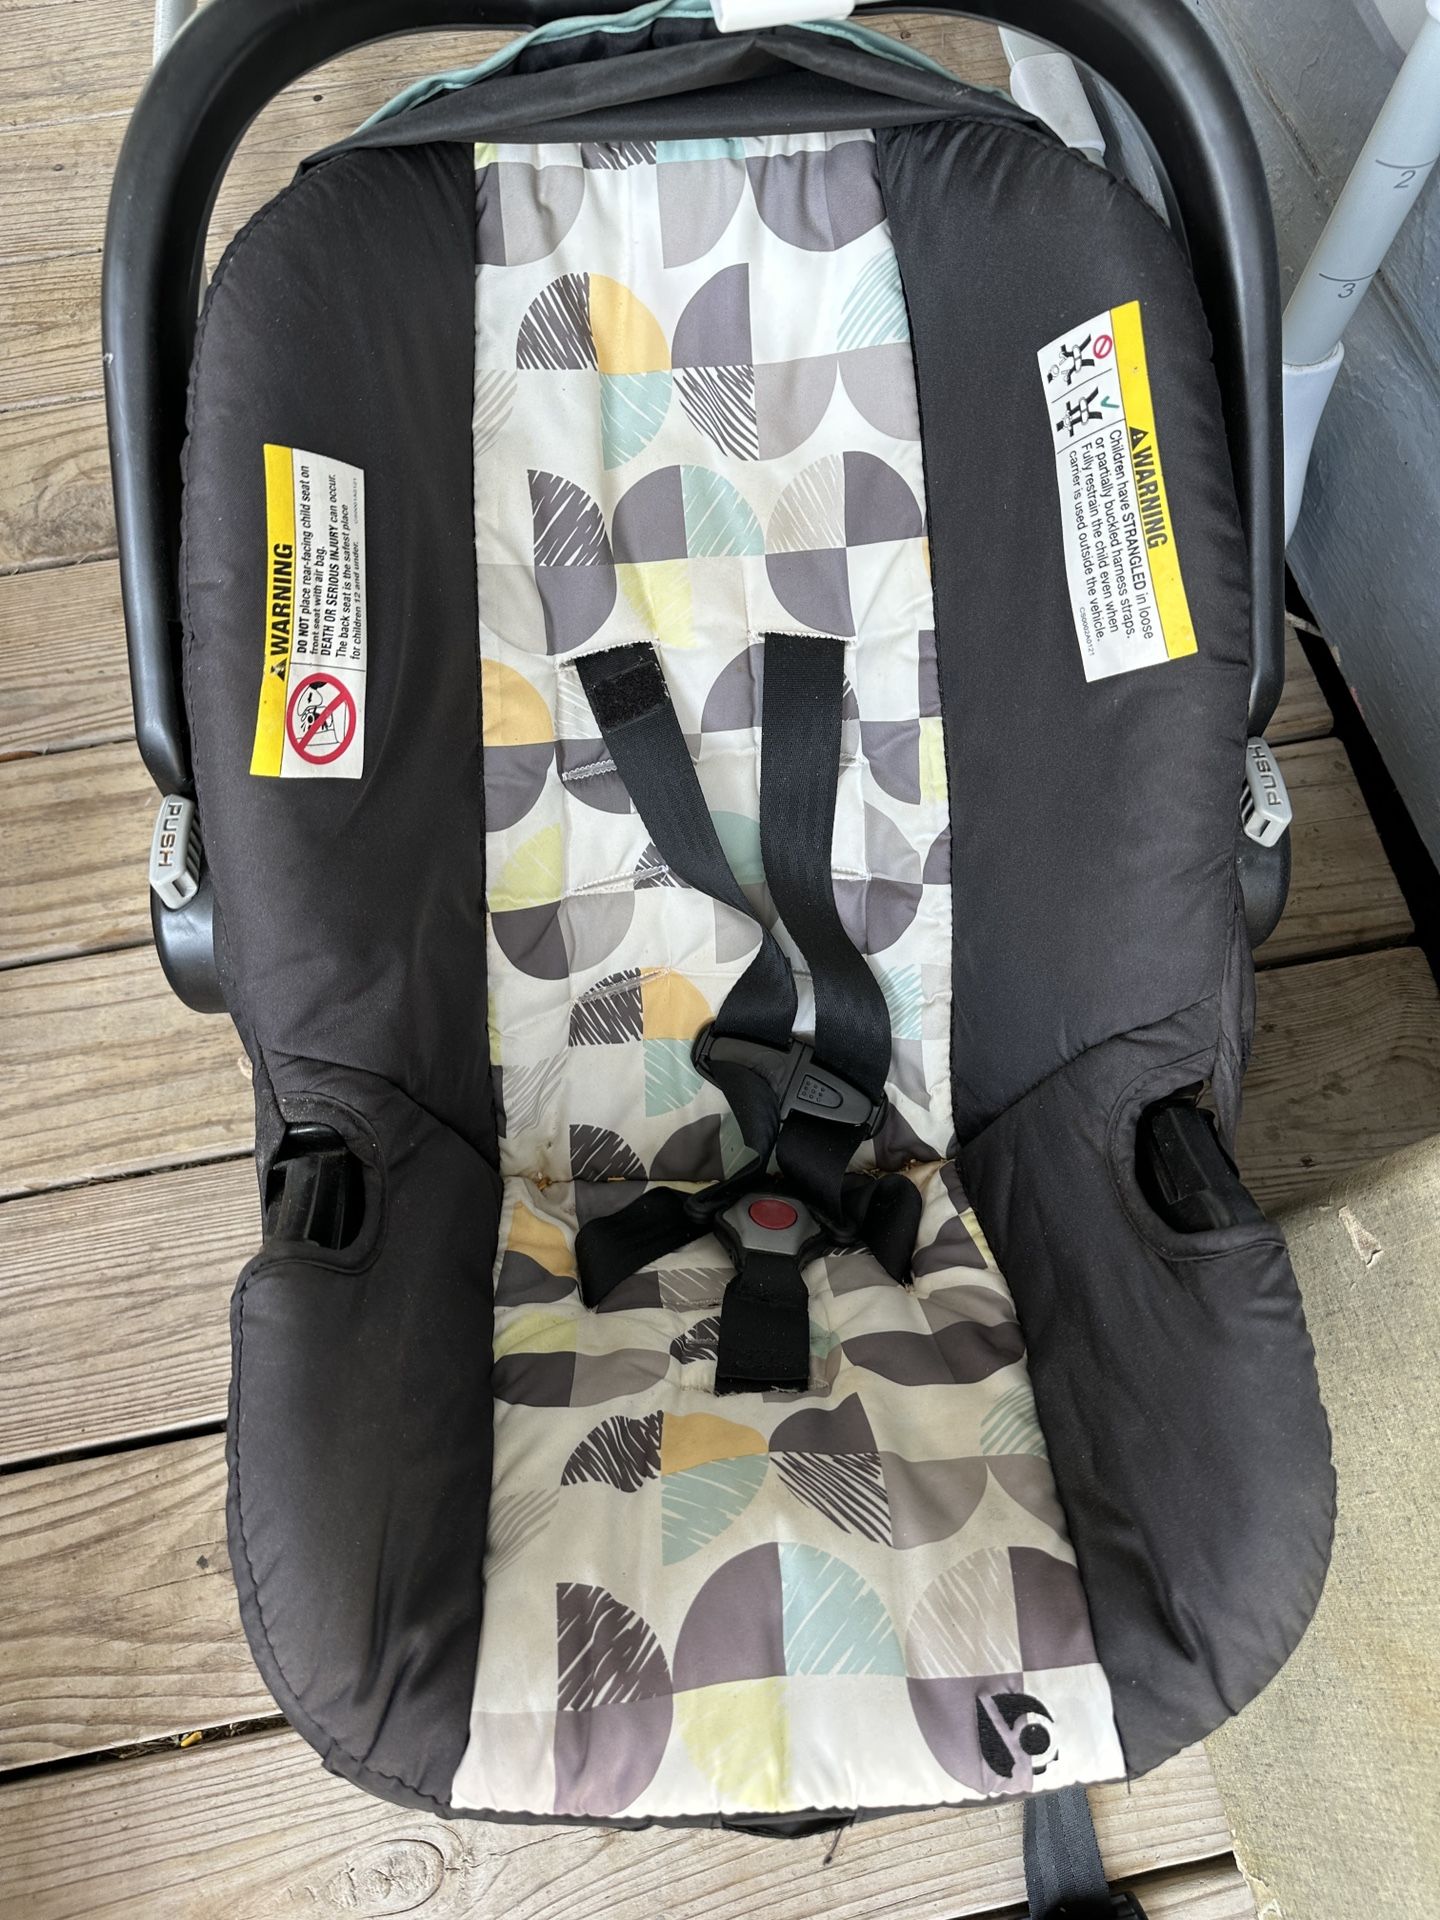 Graco Car Seat For Infant 